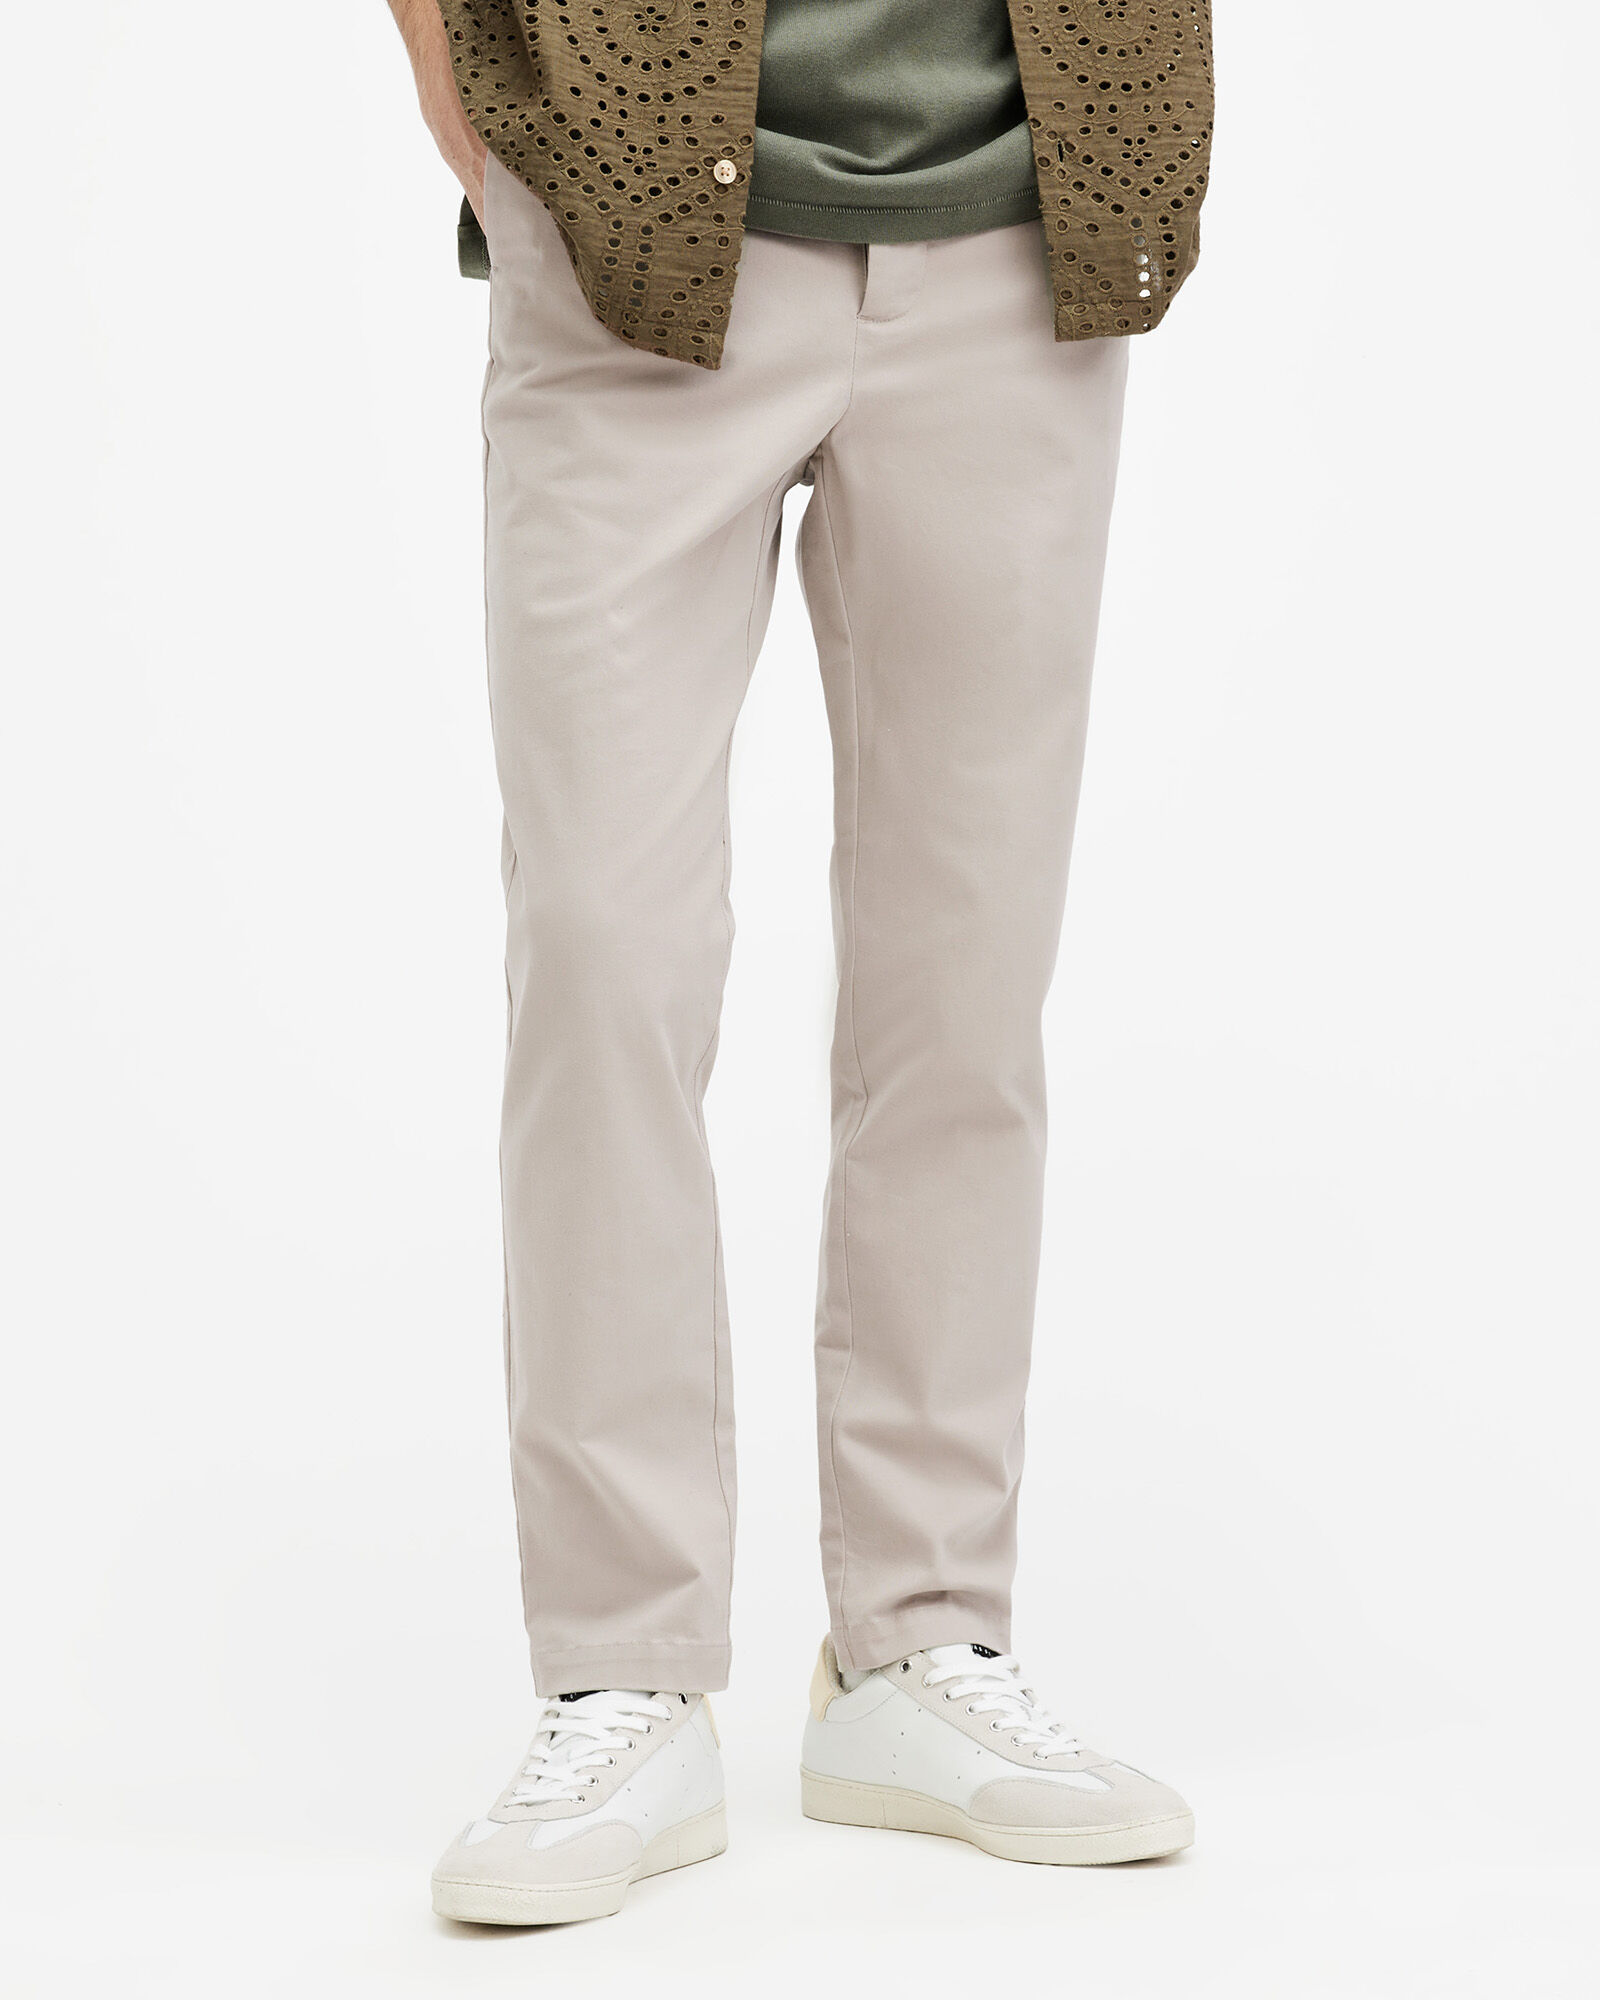 Buy Gap Easy Straight Pull-On Trousers from the Gap online shop